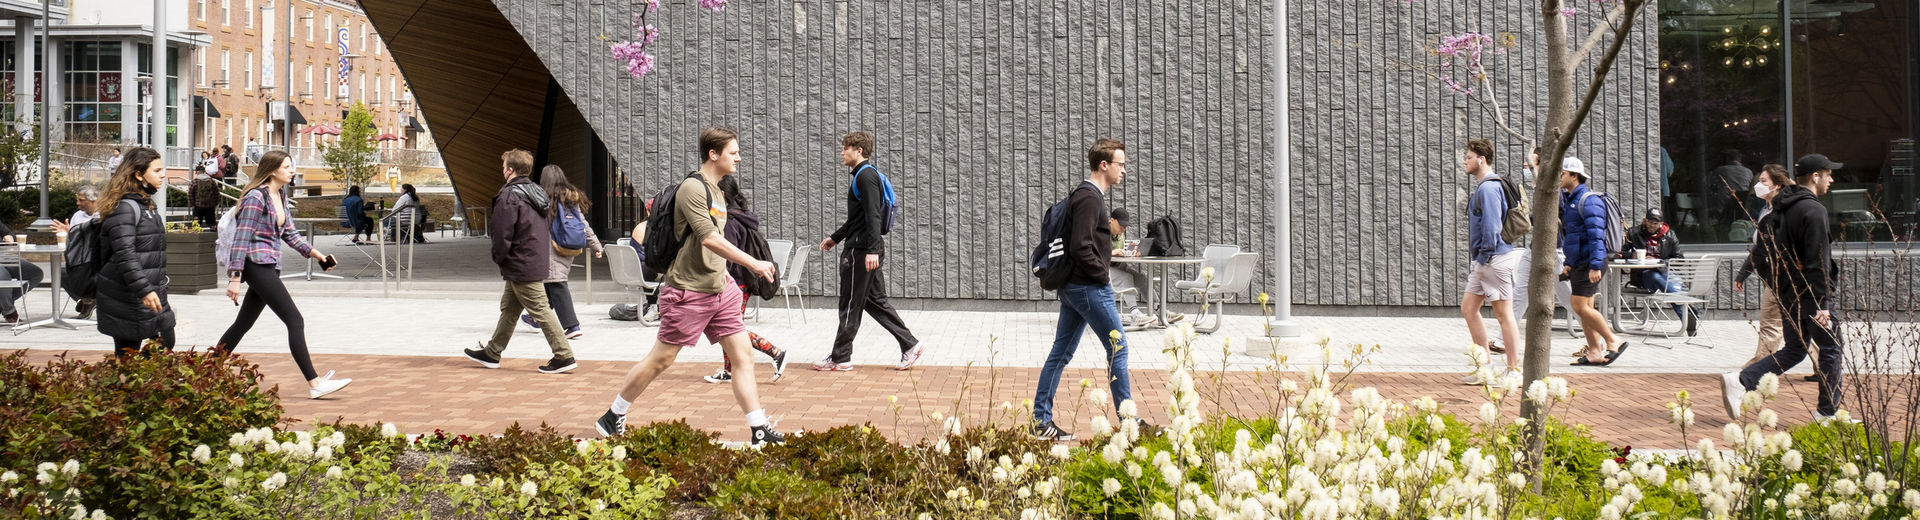 students walking across campus on a spring day.